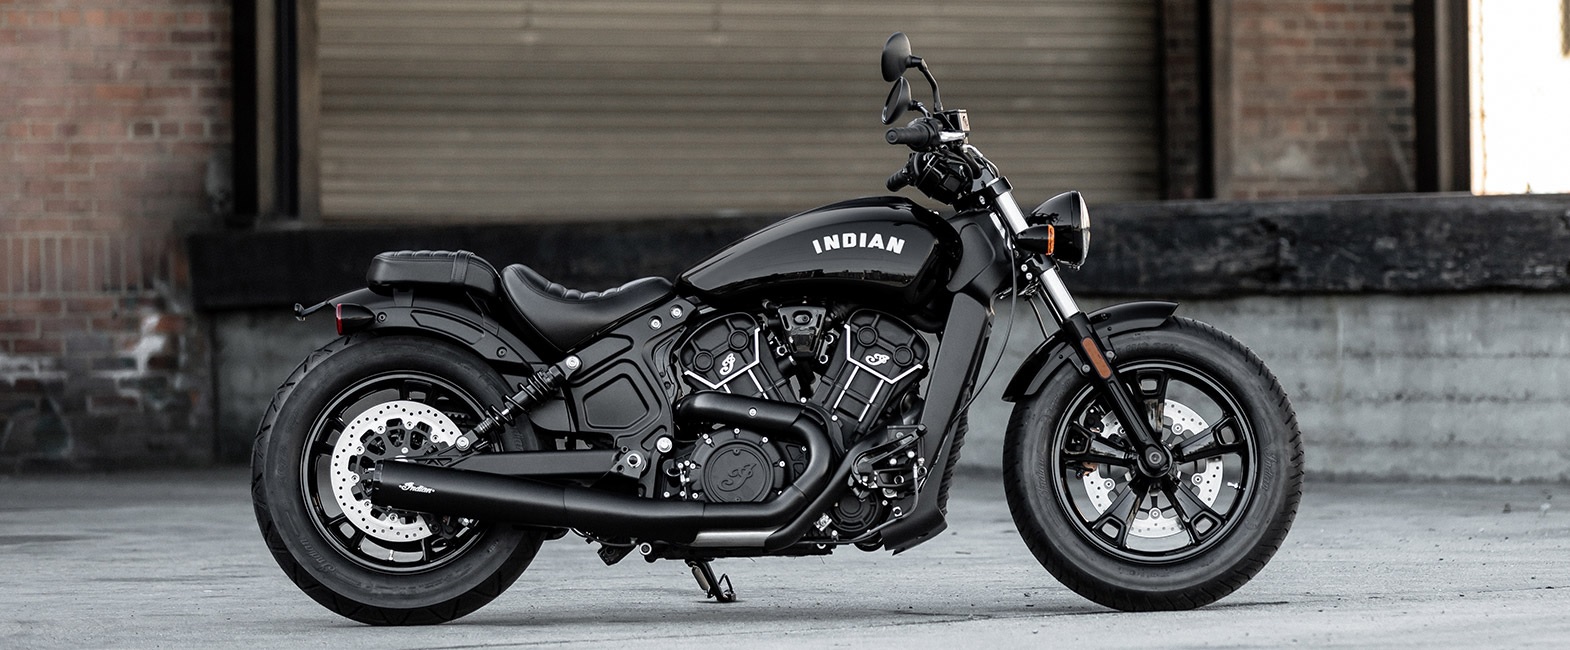 2020 Indian Scout Sixty Bobber